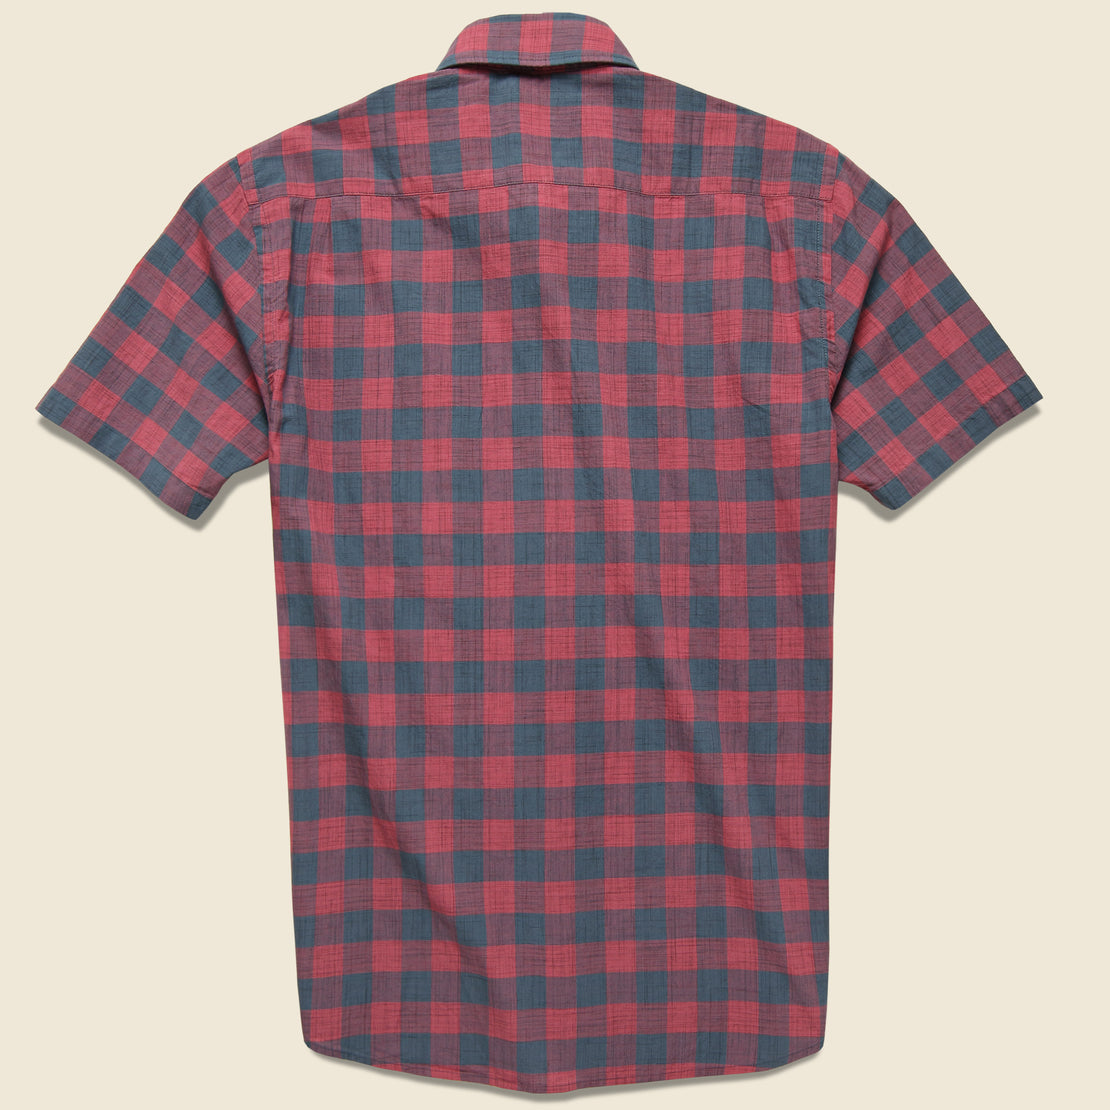 Pacific Shirt - Rose Buffalo Check - Faherty - STAG Provisions - Tops - S/S Woven - Plaid